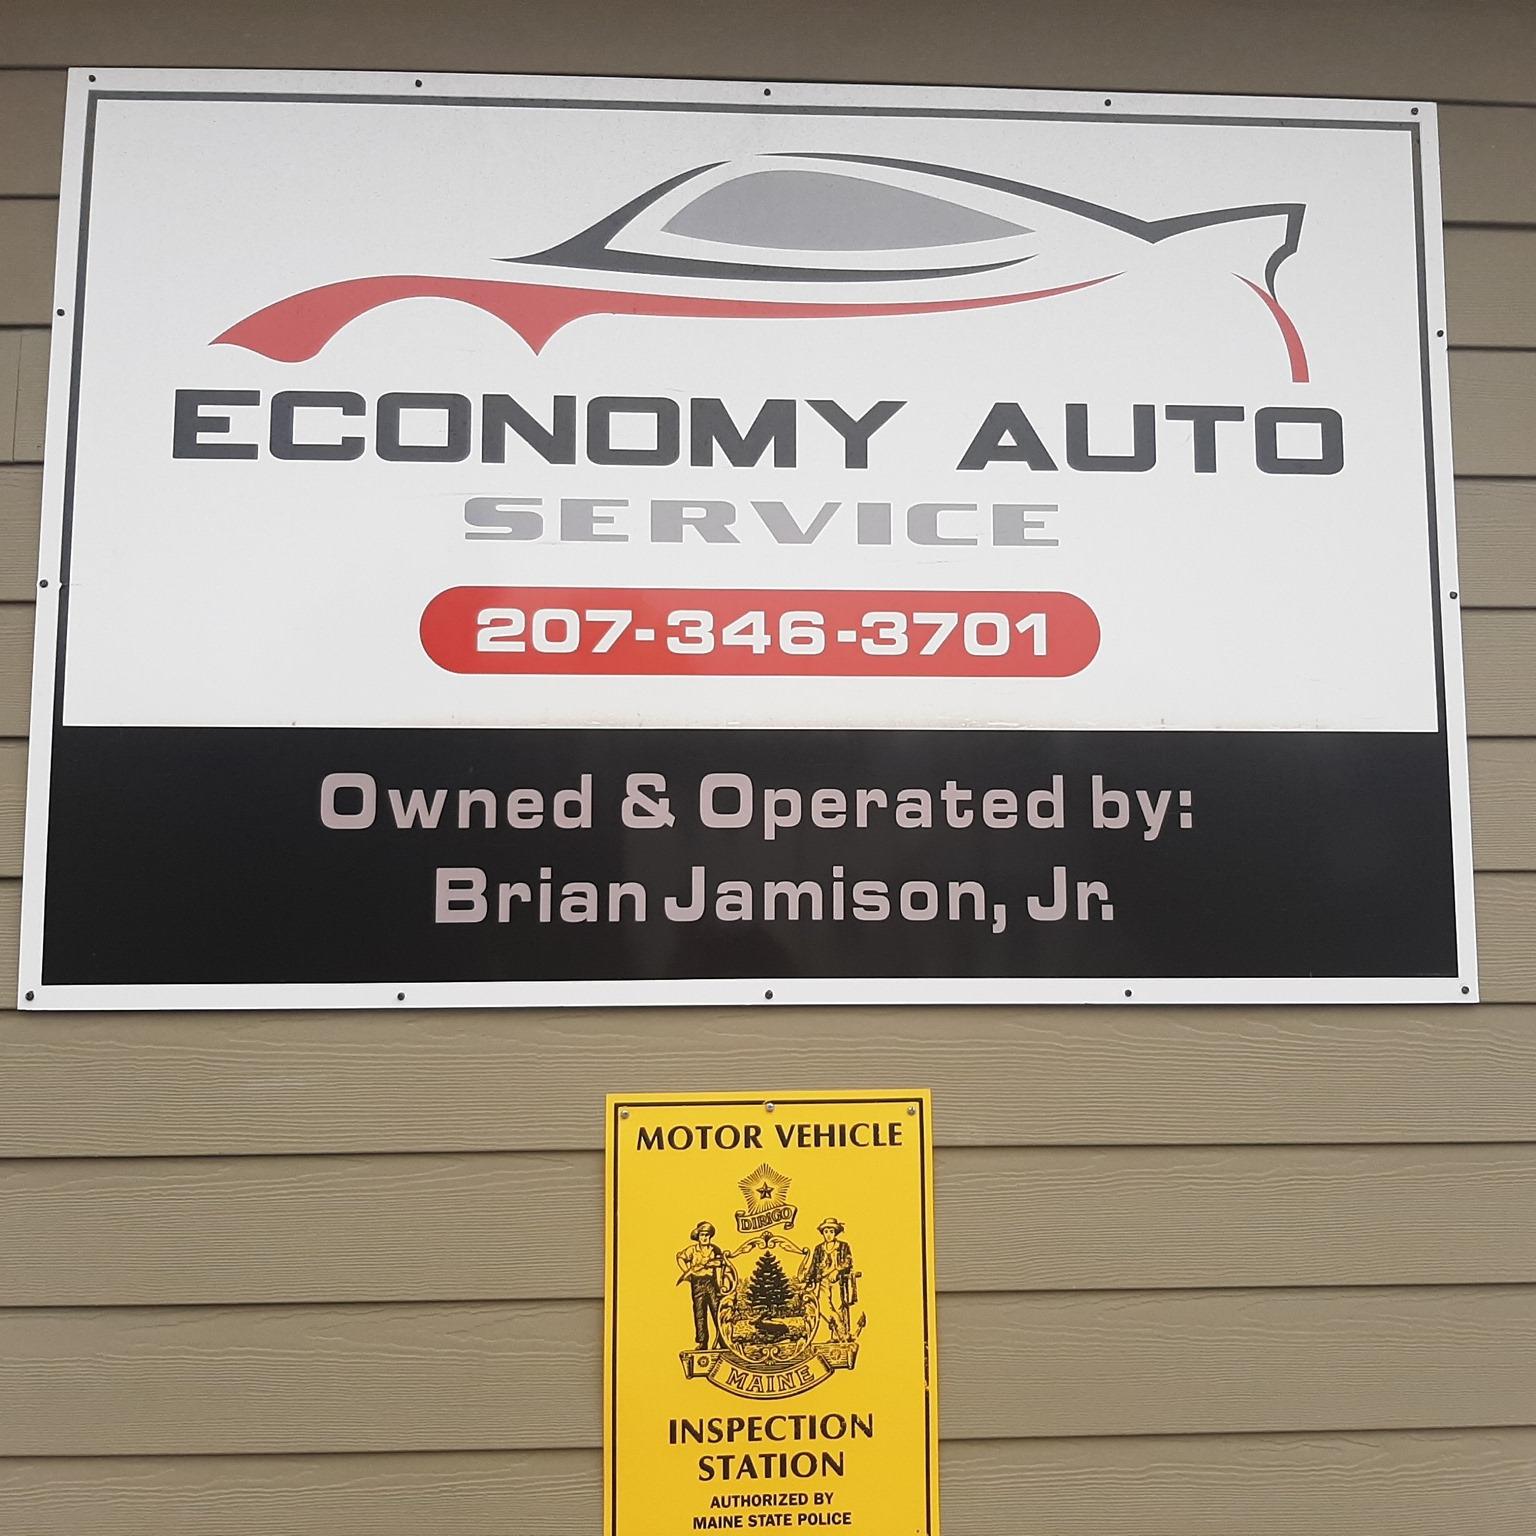 Looking for a dependable mechanic nearby? Economy Auto Service Inc. offers skilled mechanics who are committed to delivering quality services and ensuring your vehicle is well taken care of, whether it's routine maintenance or a complex repair.